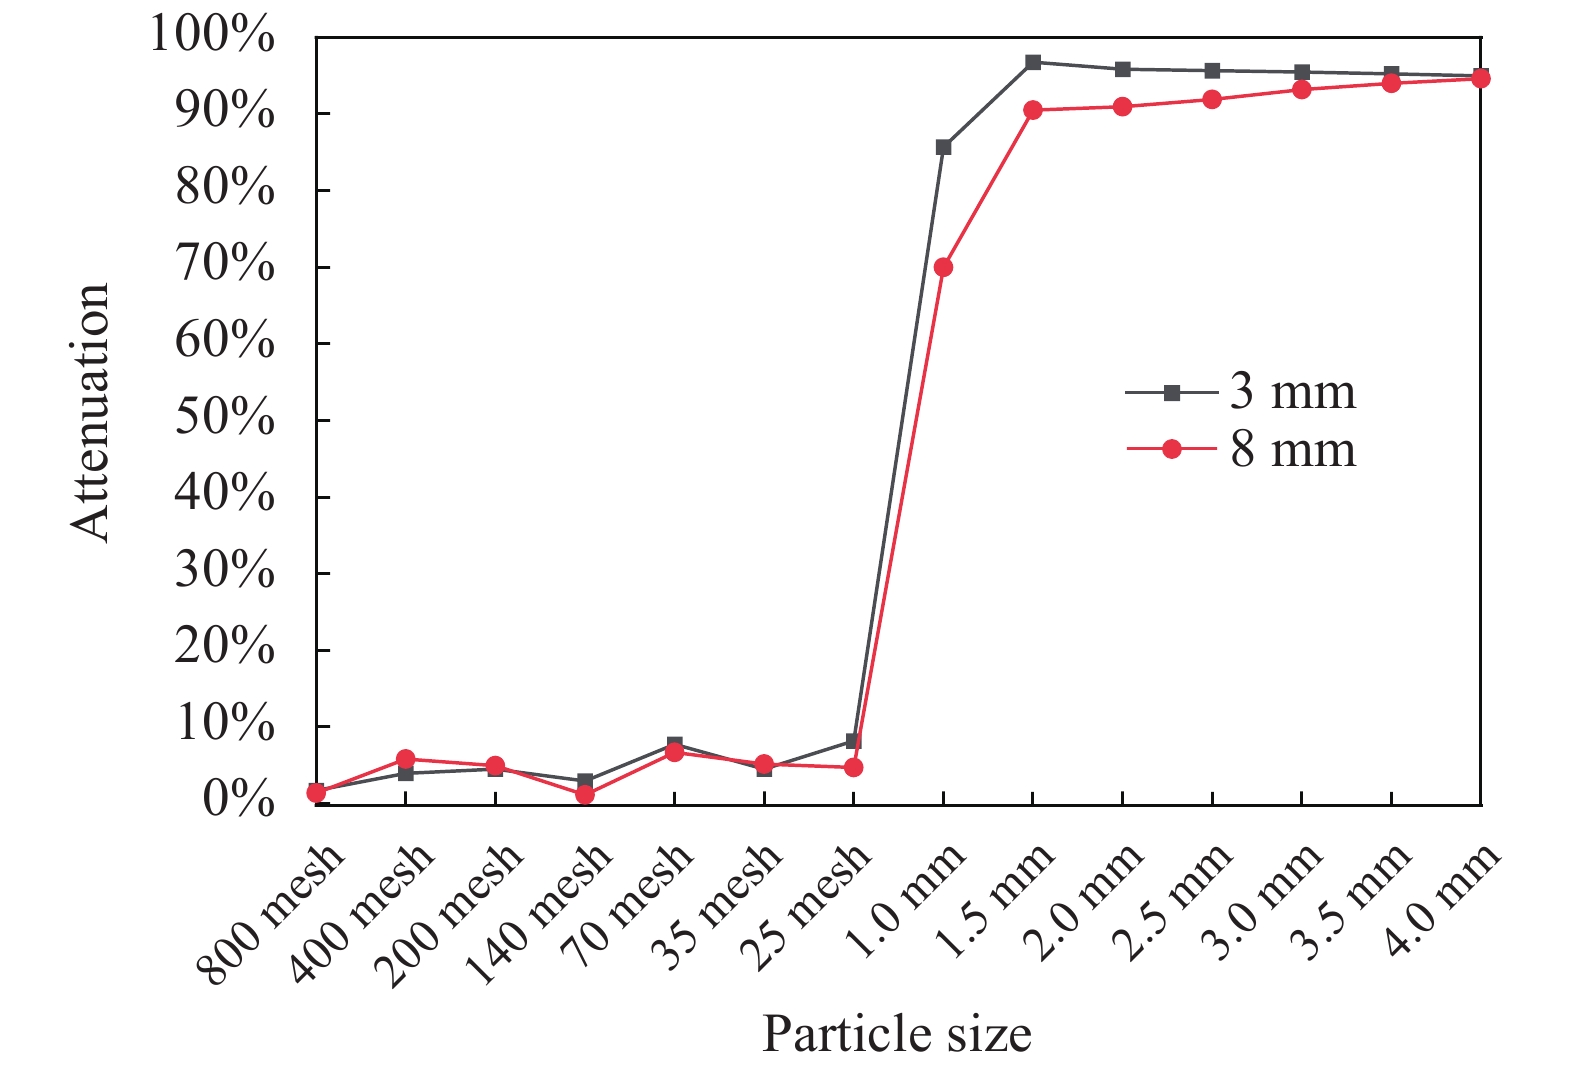 Influence of carbon fiber particle size on millimeter wave attenuation performance